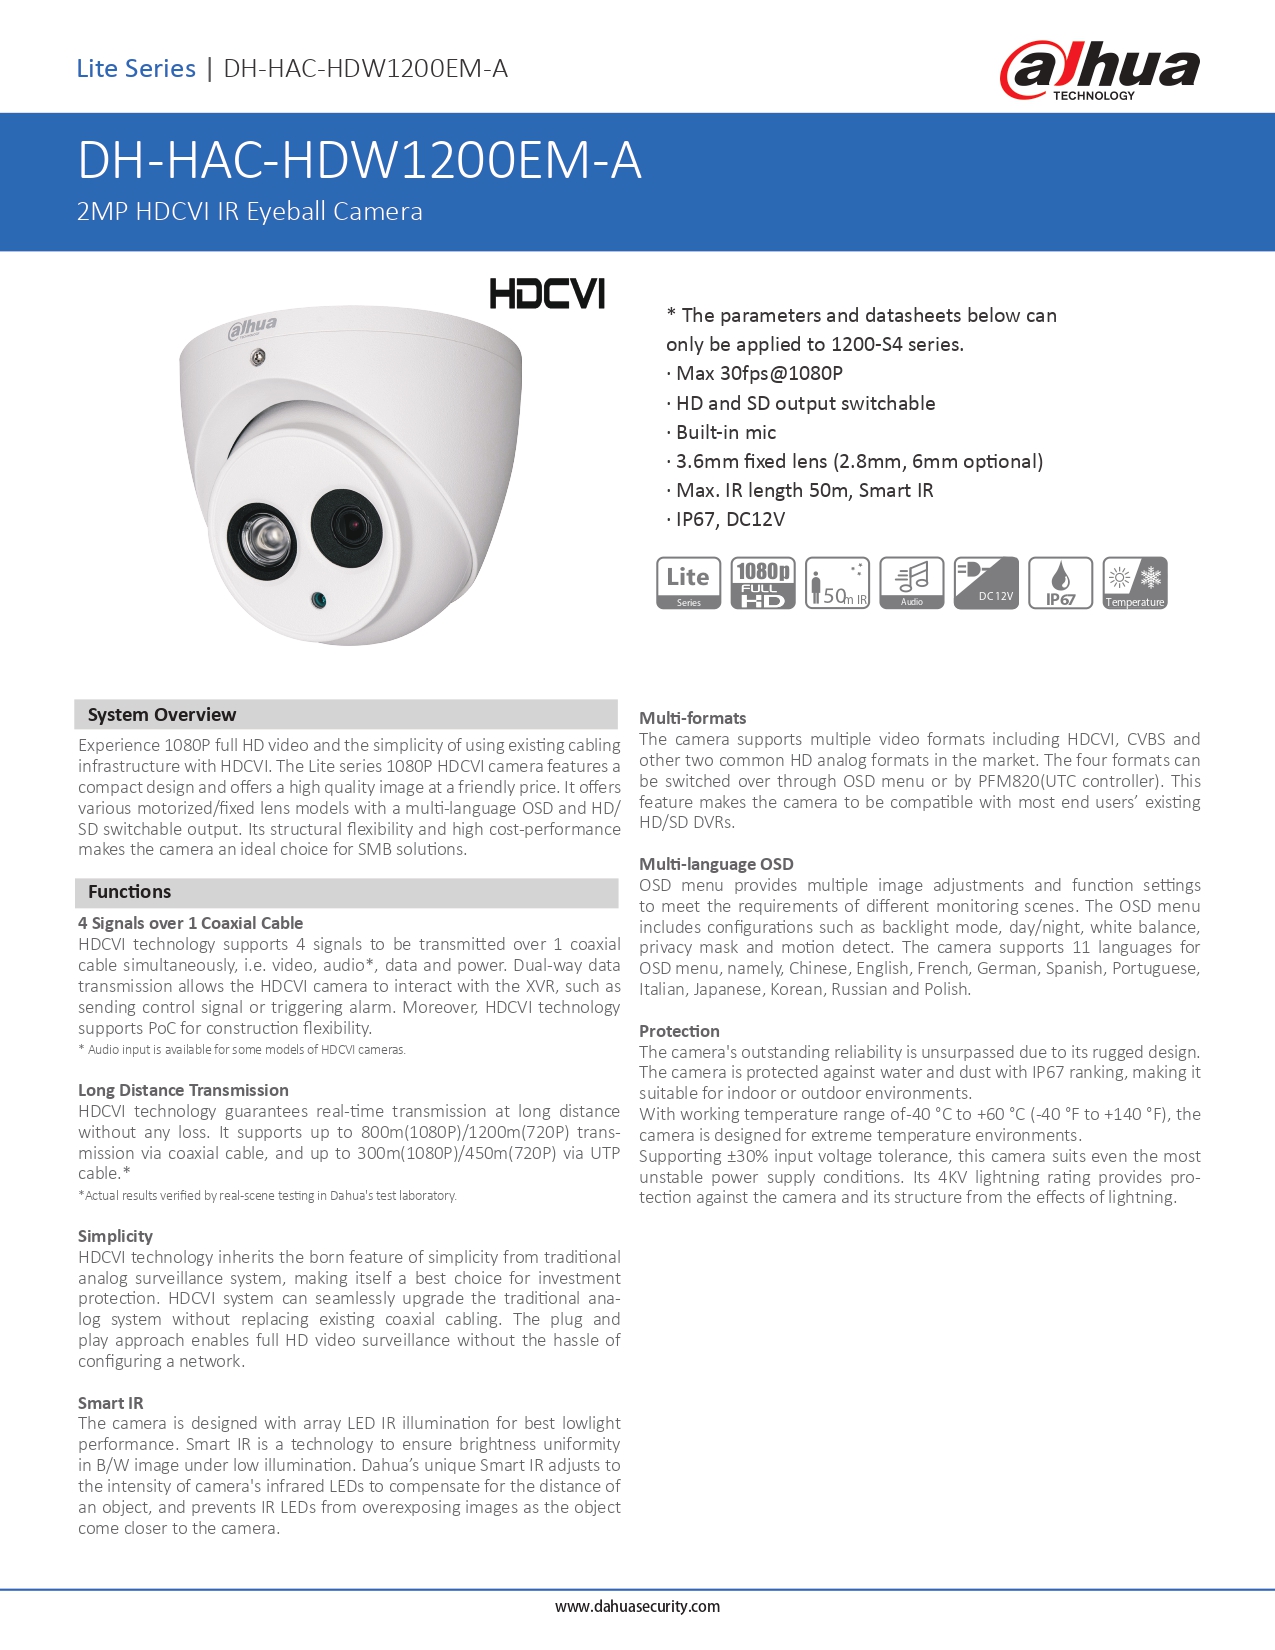 Dahua DH-HAC-HDW1200EM-A HD CCTV Camera Solution – 2 CAM Package | IR Night Vision | with Installation | Full HD 1080 | 24Hrs Recording | Life Time After Sales Support